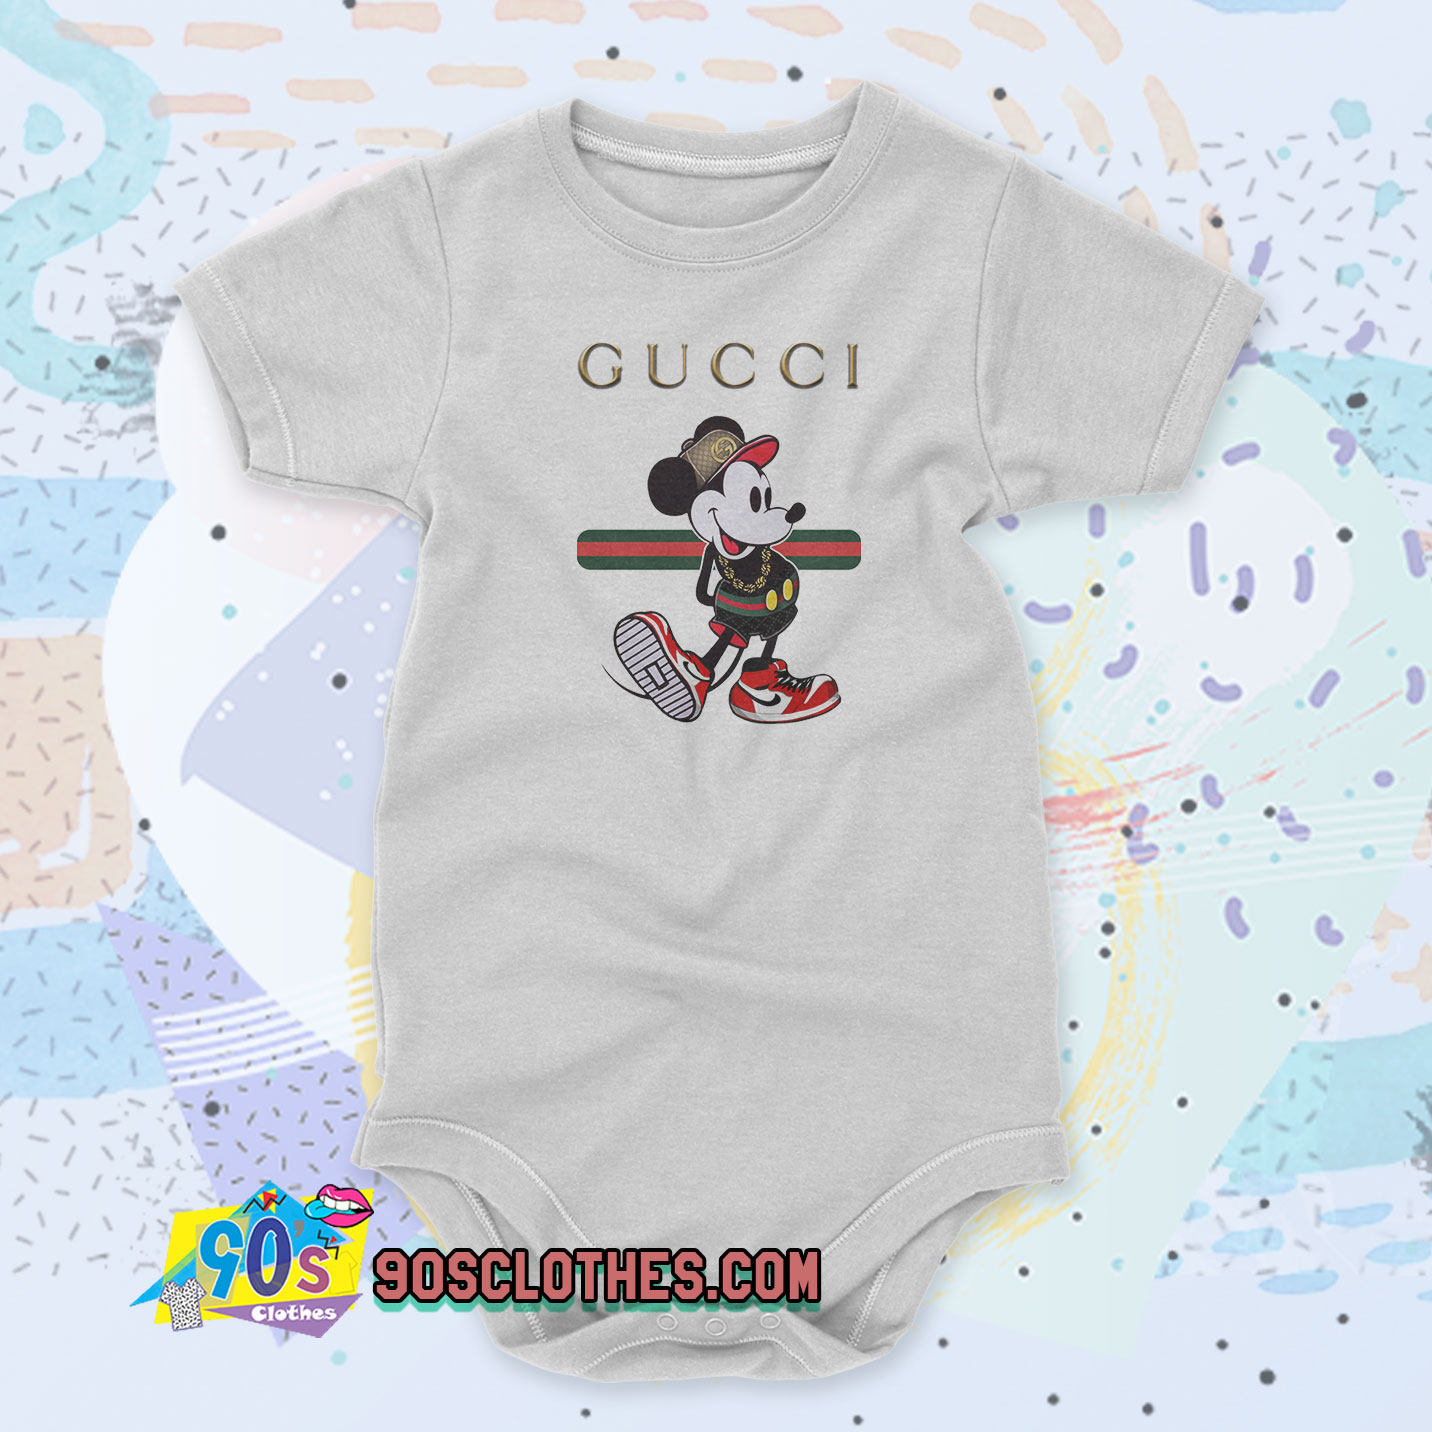 Gucci's baby clothes line